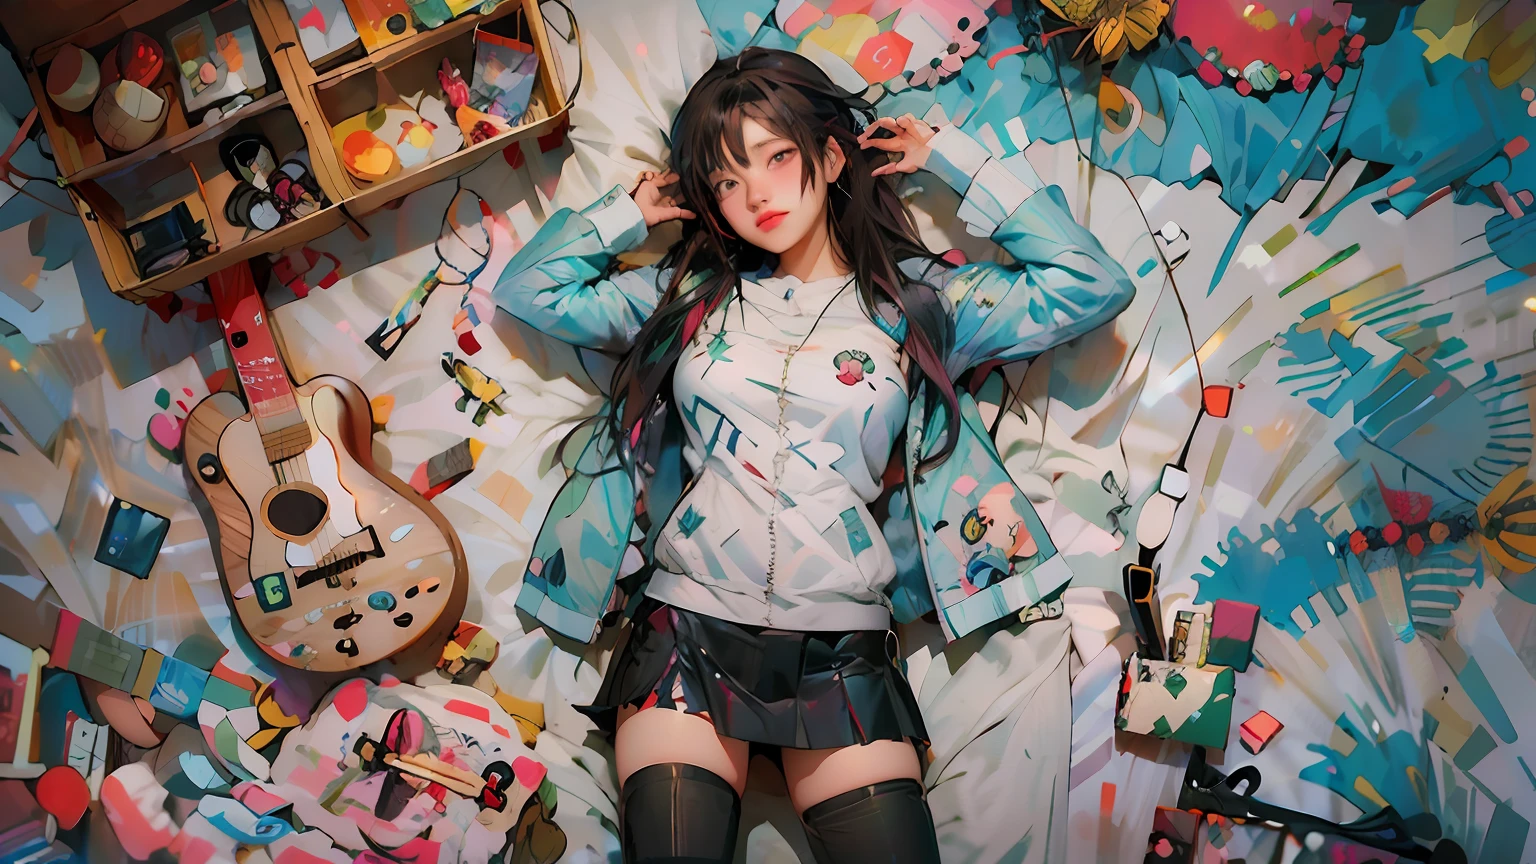 The girl lay on the bed，Holding a guitar and a bunch of toys, Guviz-style artwork, Anime girl cosplay, cyberpunk anime girl, style of anime4 K, e - girl, E-Girl, Guviz, fanart best artstation, Guweiz in Pixiv ArtStation, anime-inspired, cyberpunk anime girl in hoodie